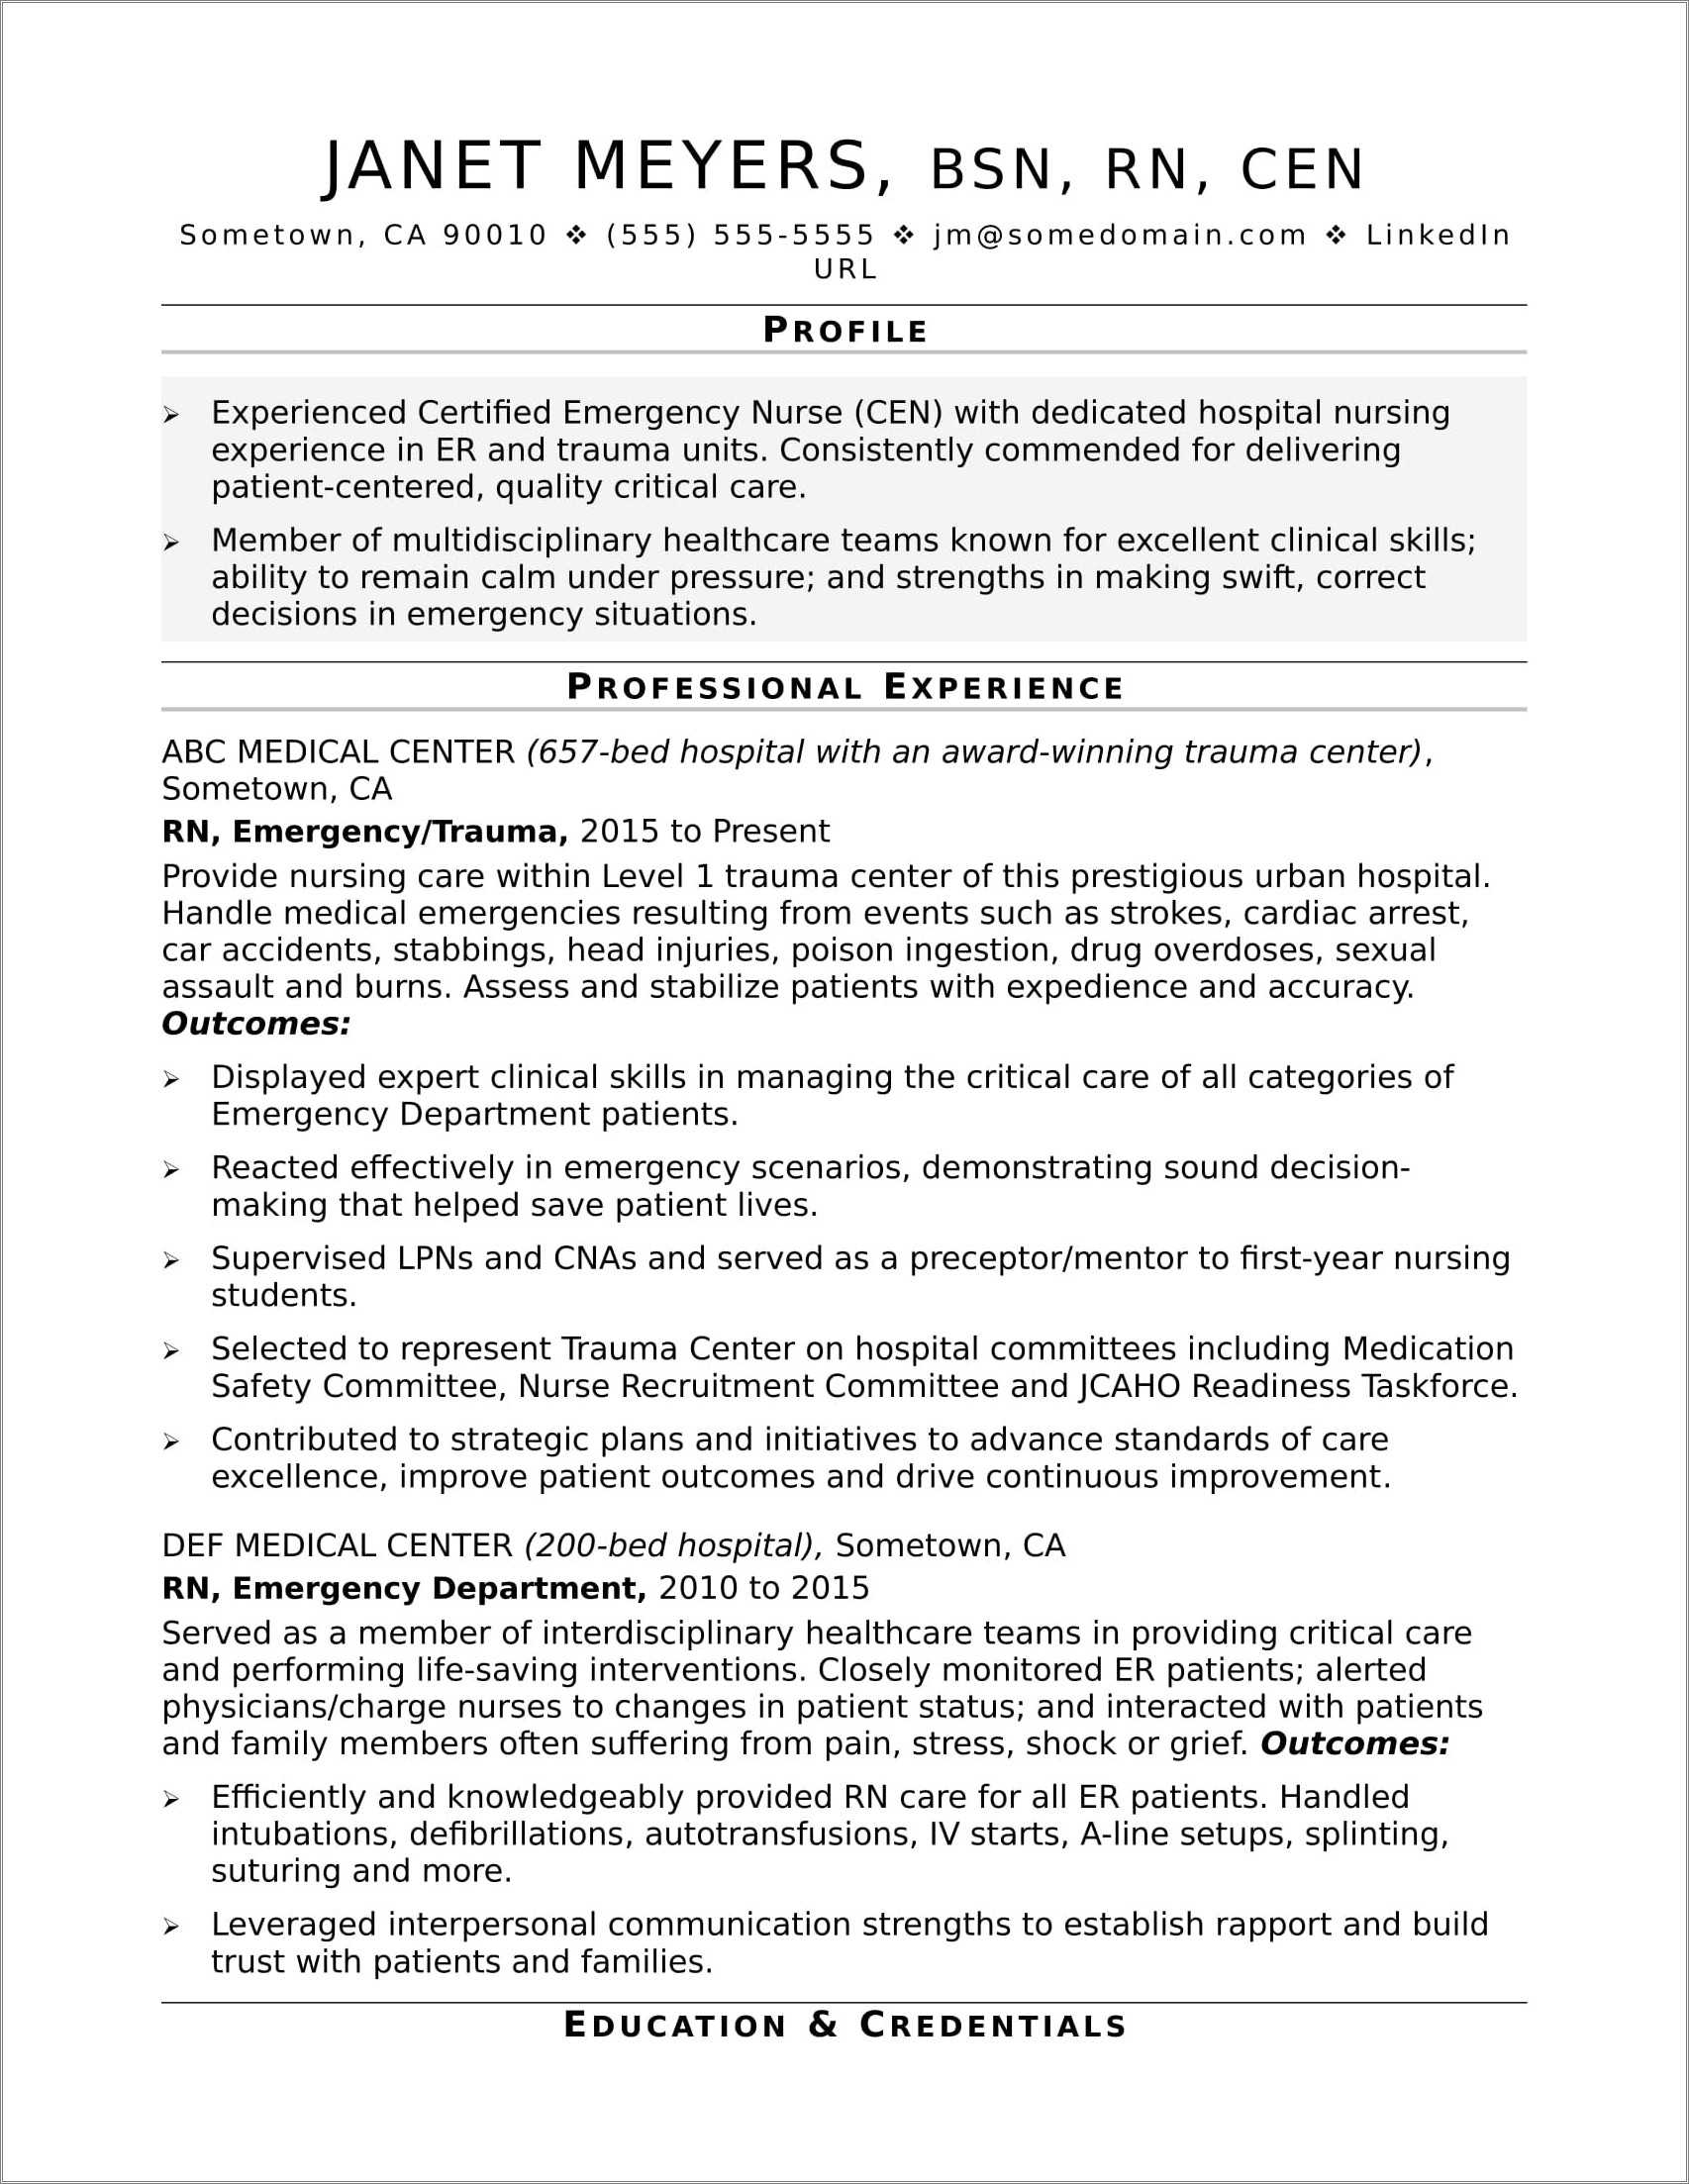 Registered Nurse Resume With One Year Experience